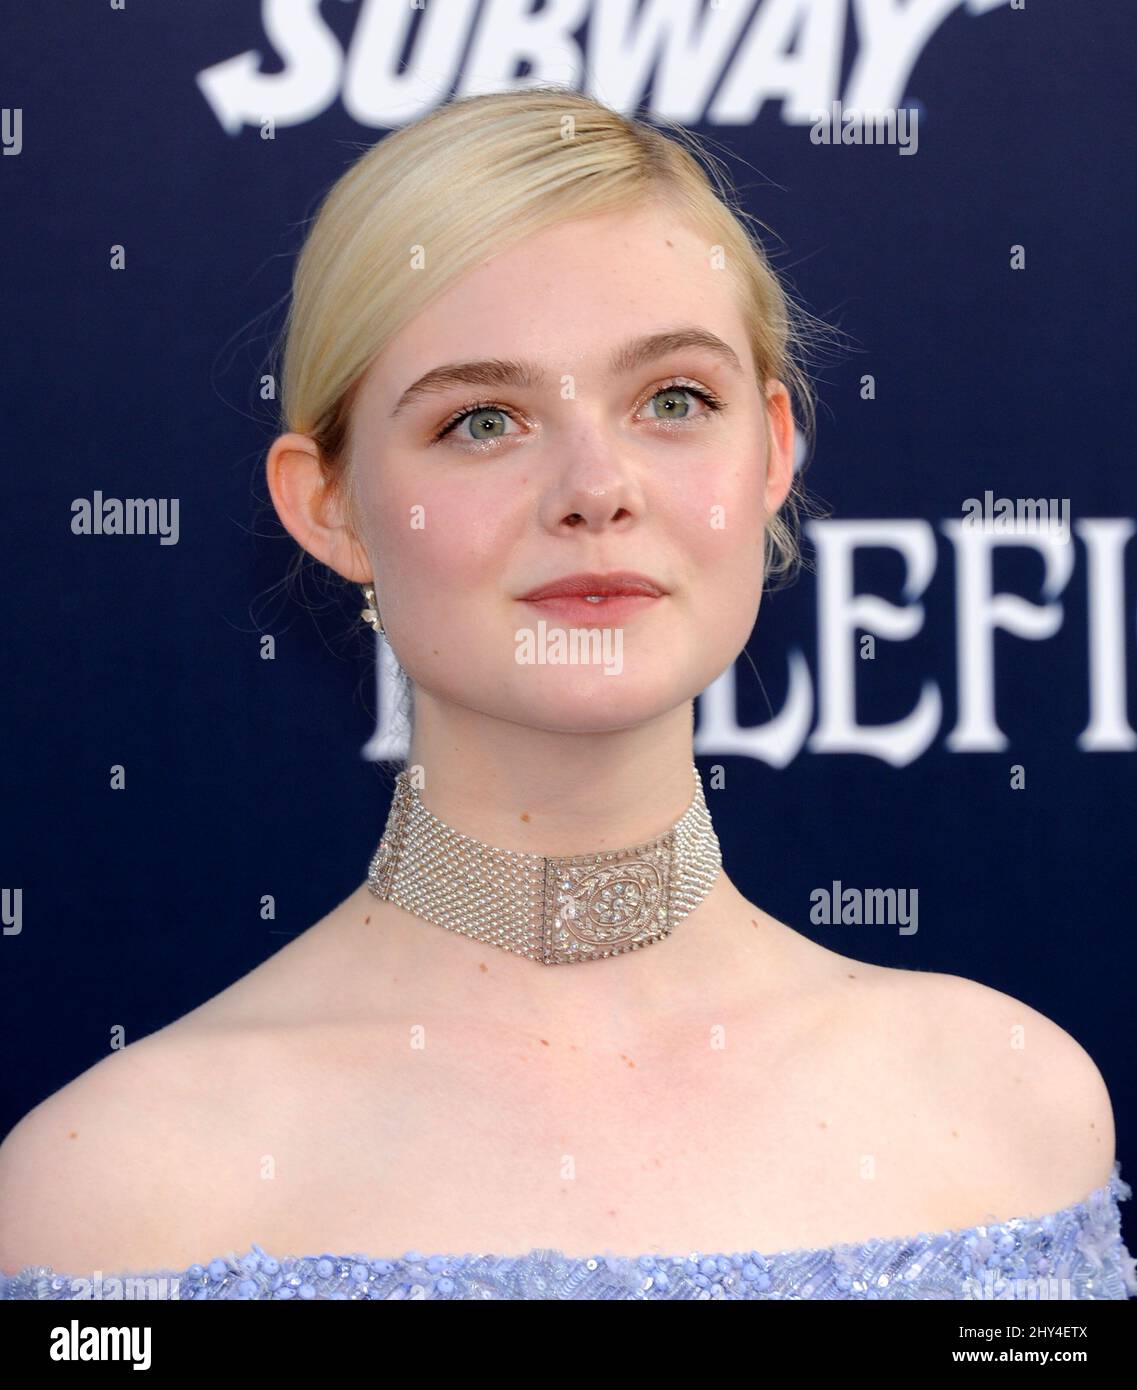 Elle Fanning attending the premiere of 'Maleficent' in Los Angeles, California. Stock Photo